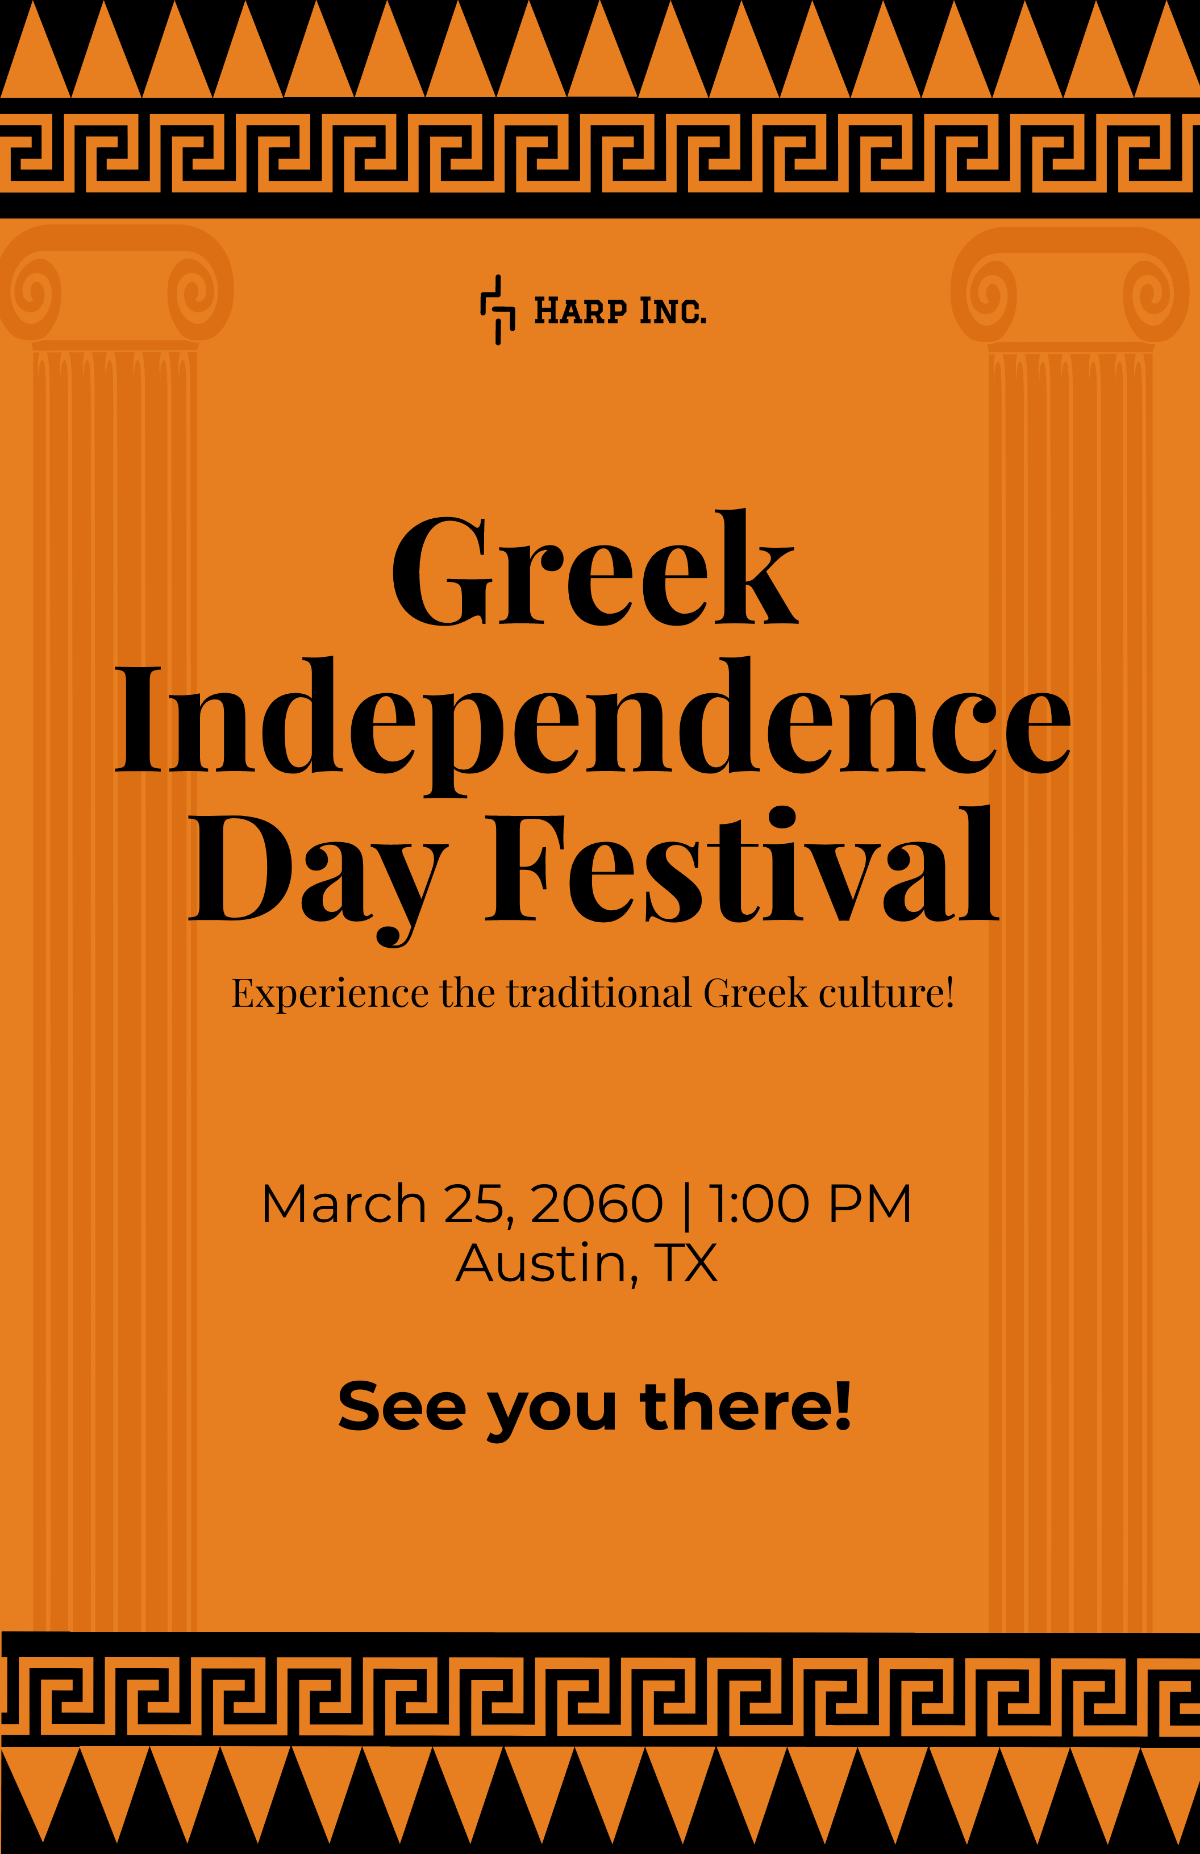 Greek Independence Day Poster